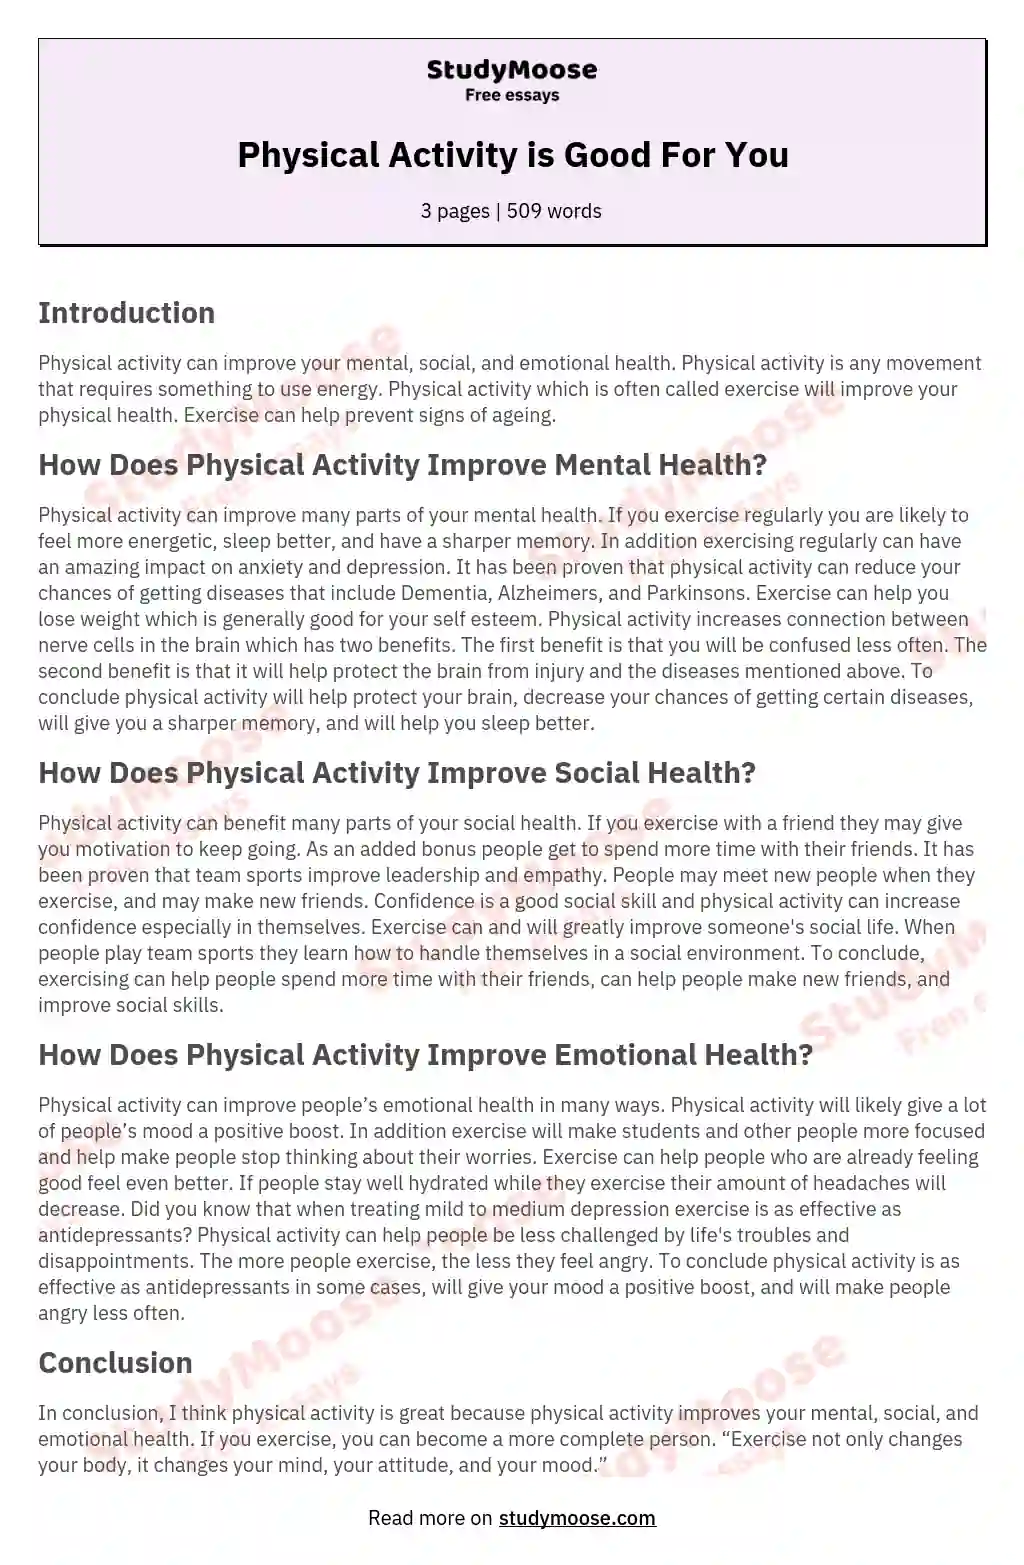 argumentative essay about mental and physical health